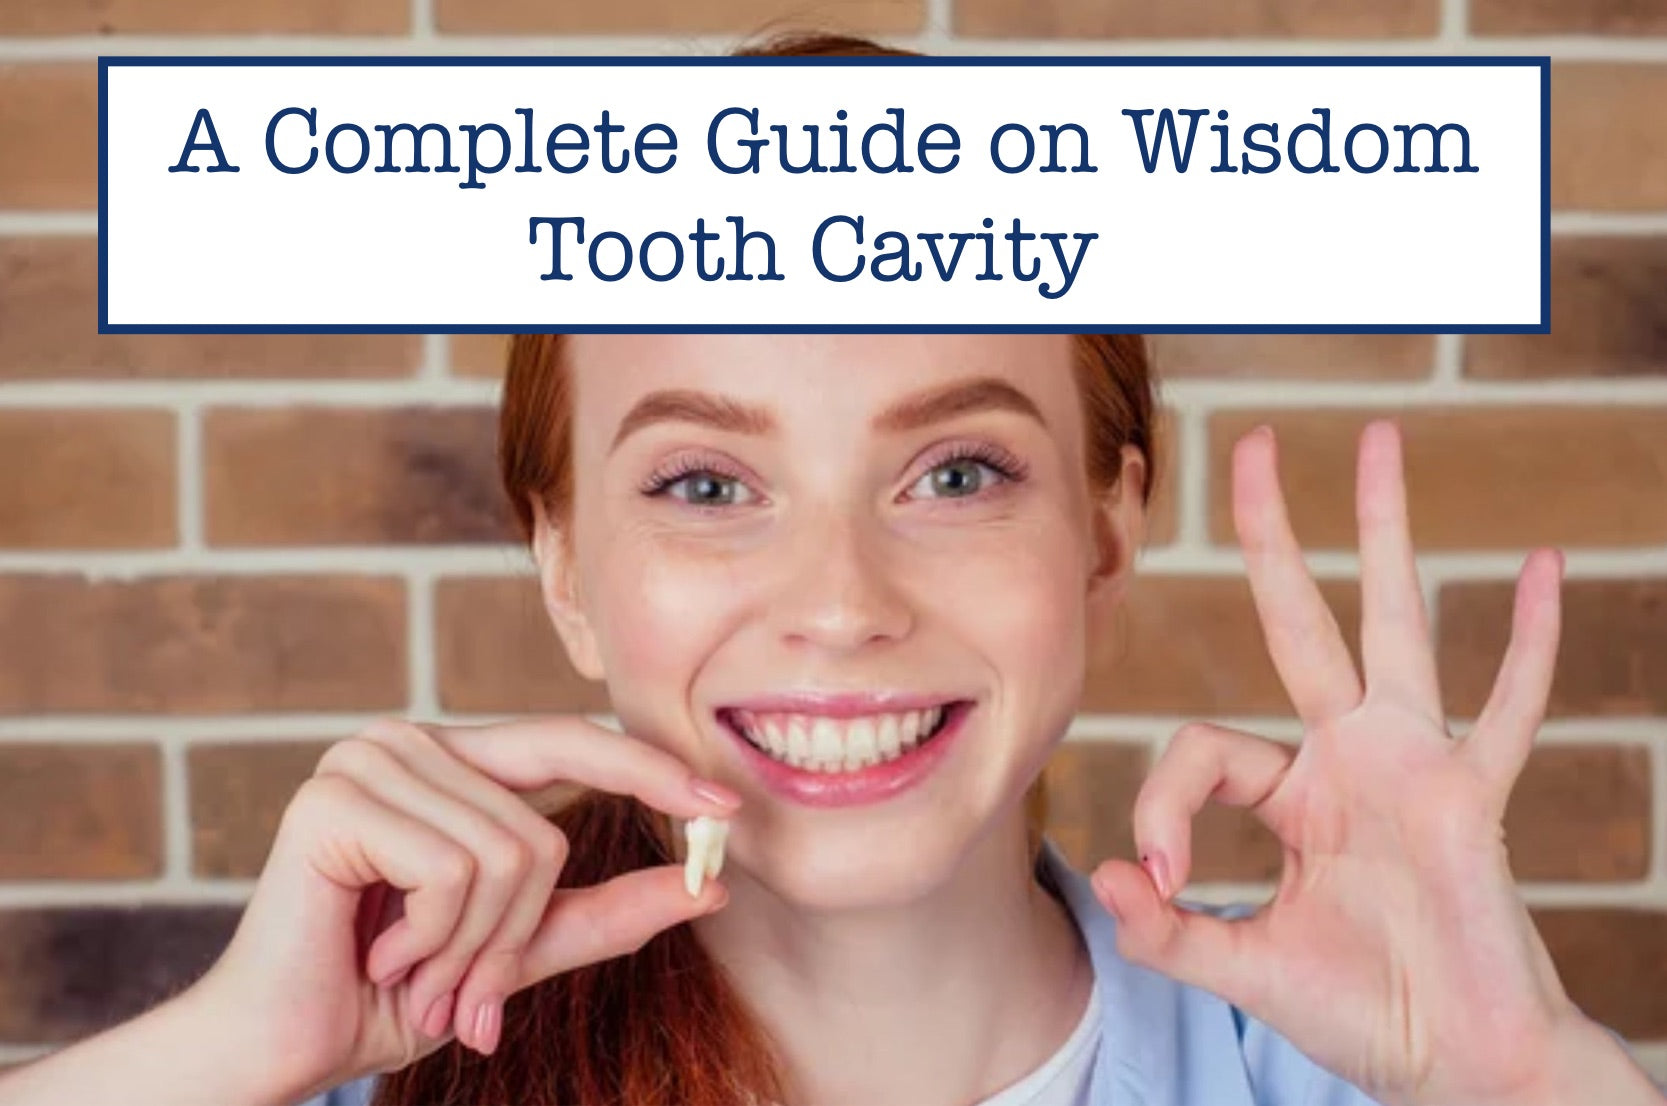 A Complete Guide on Wisdom Tooth Cavity 